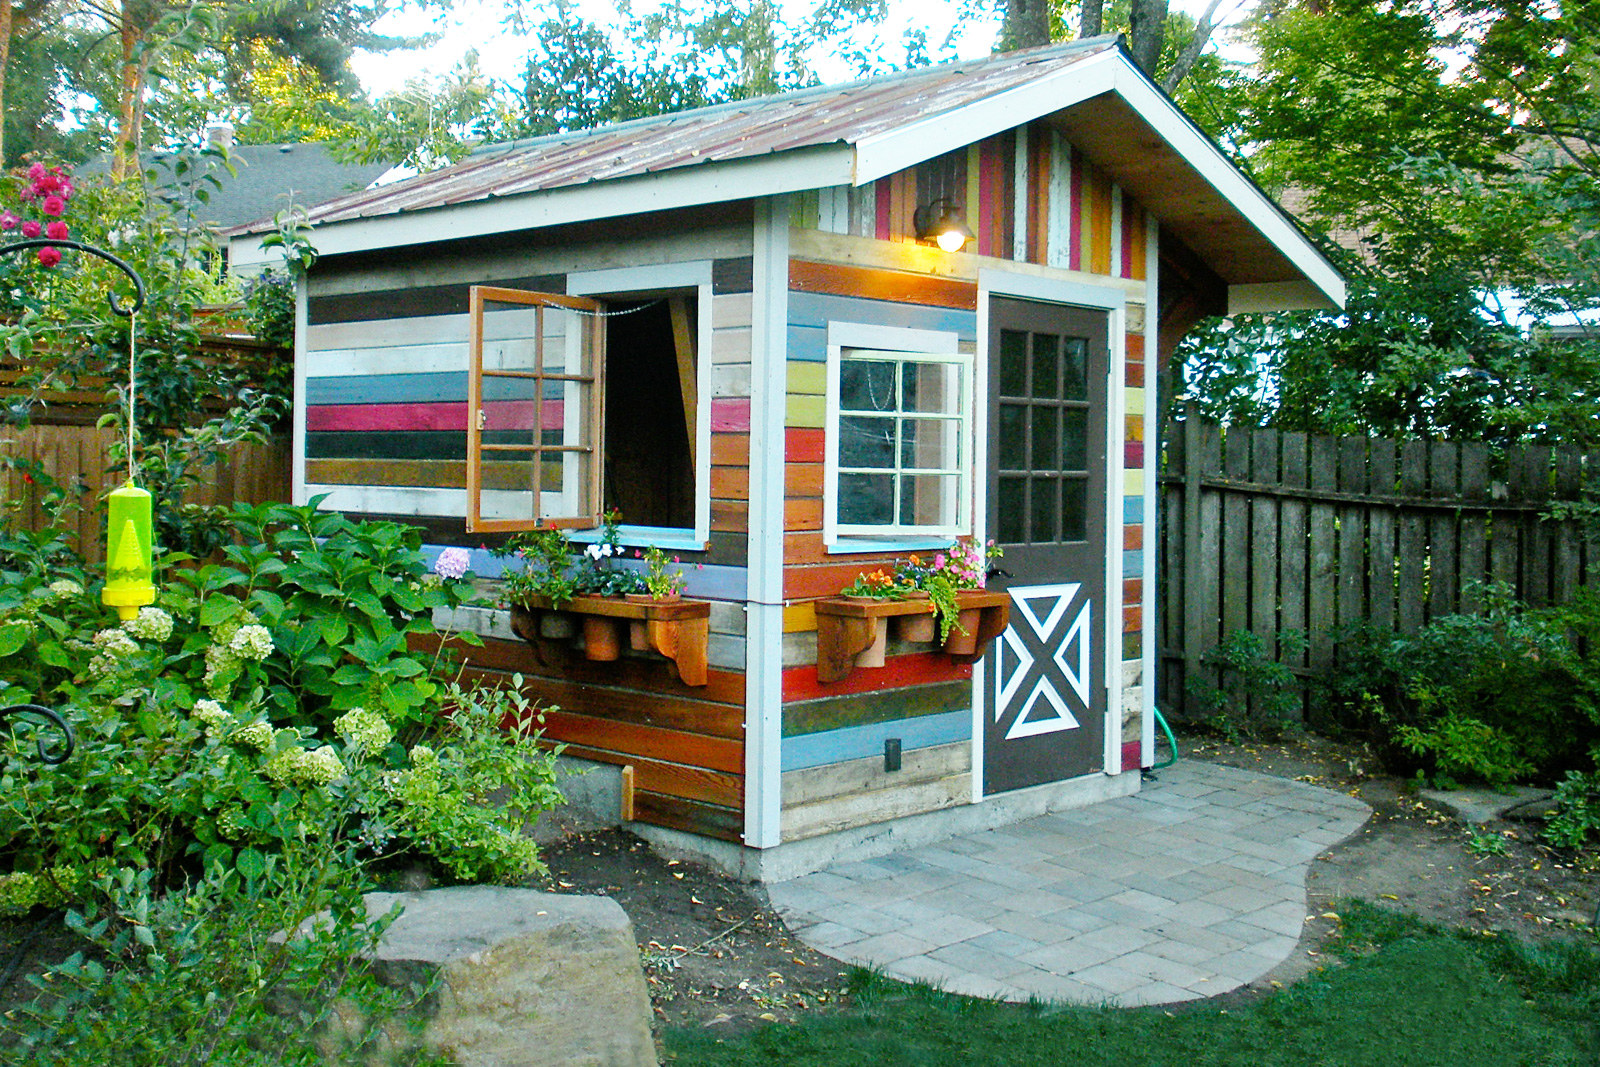 Livable Sheds | Cost of Building a Shed | Shed Kits